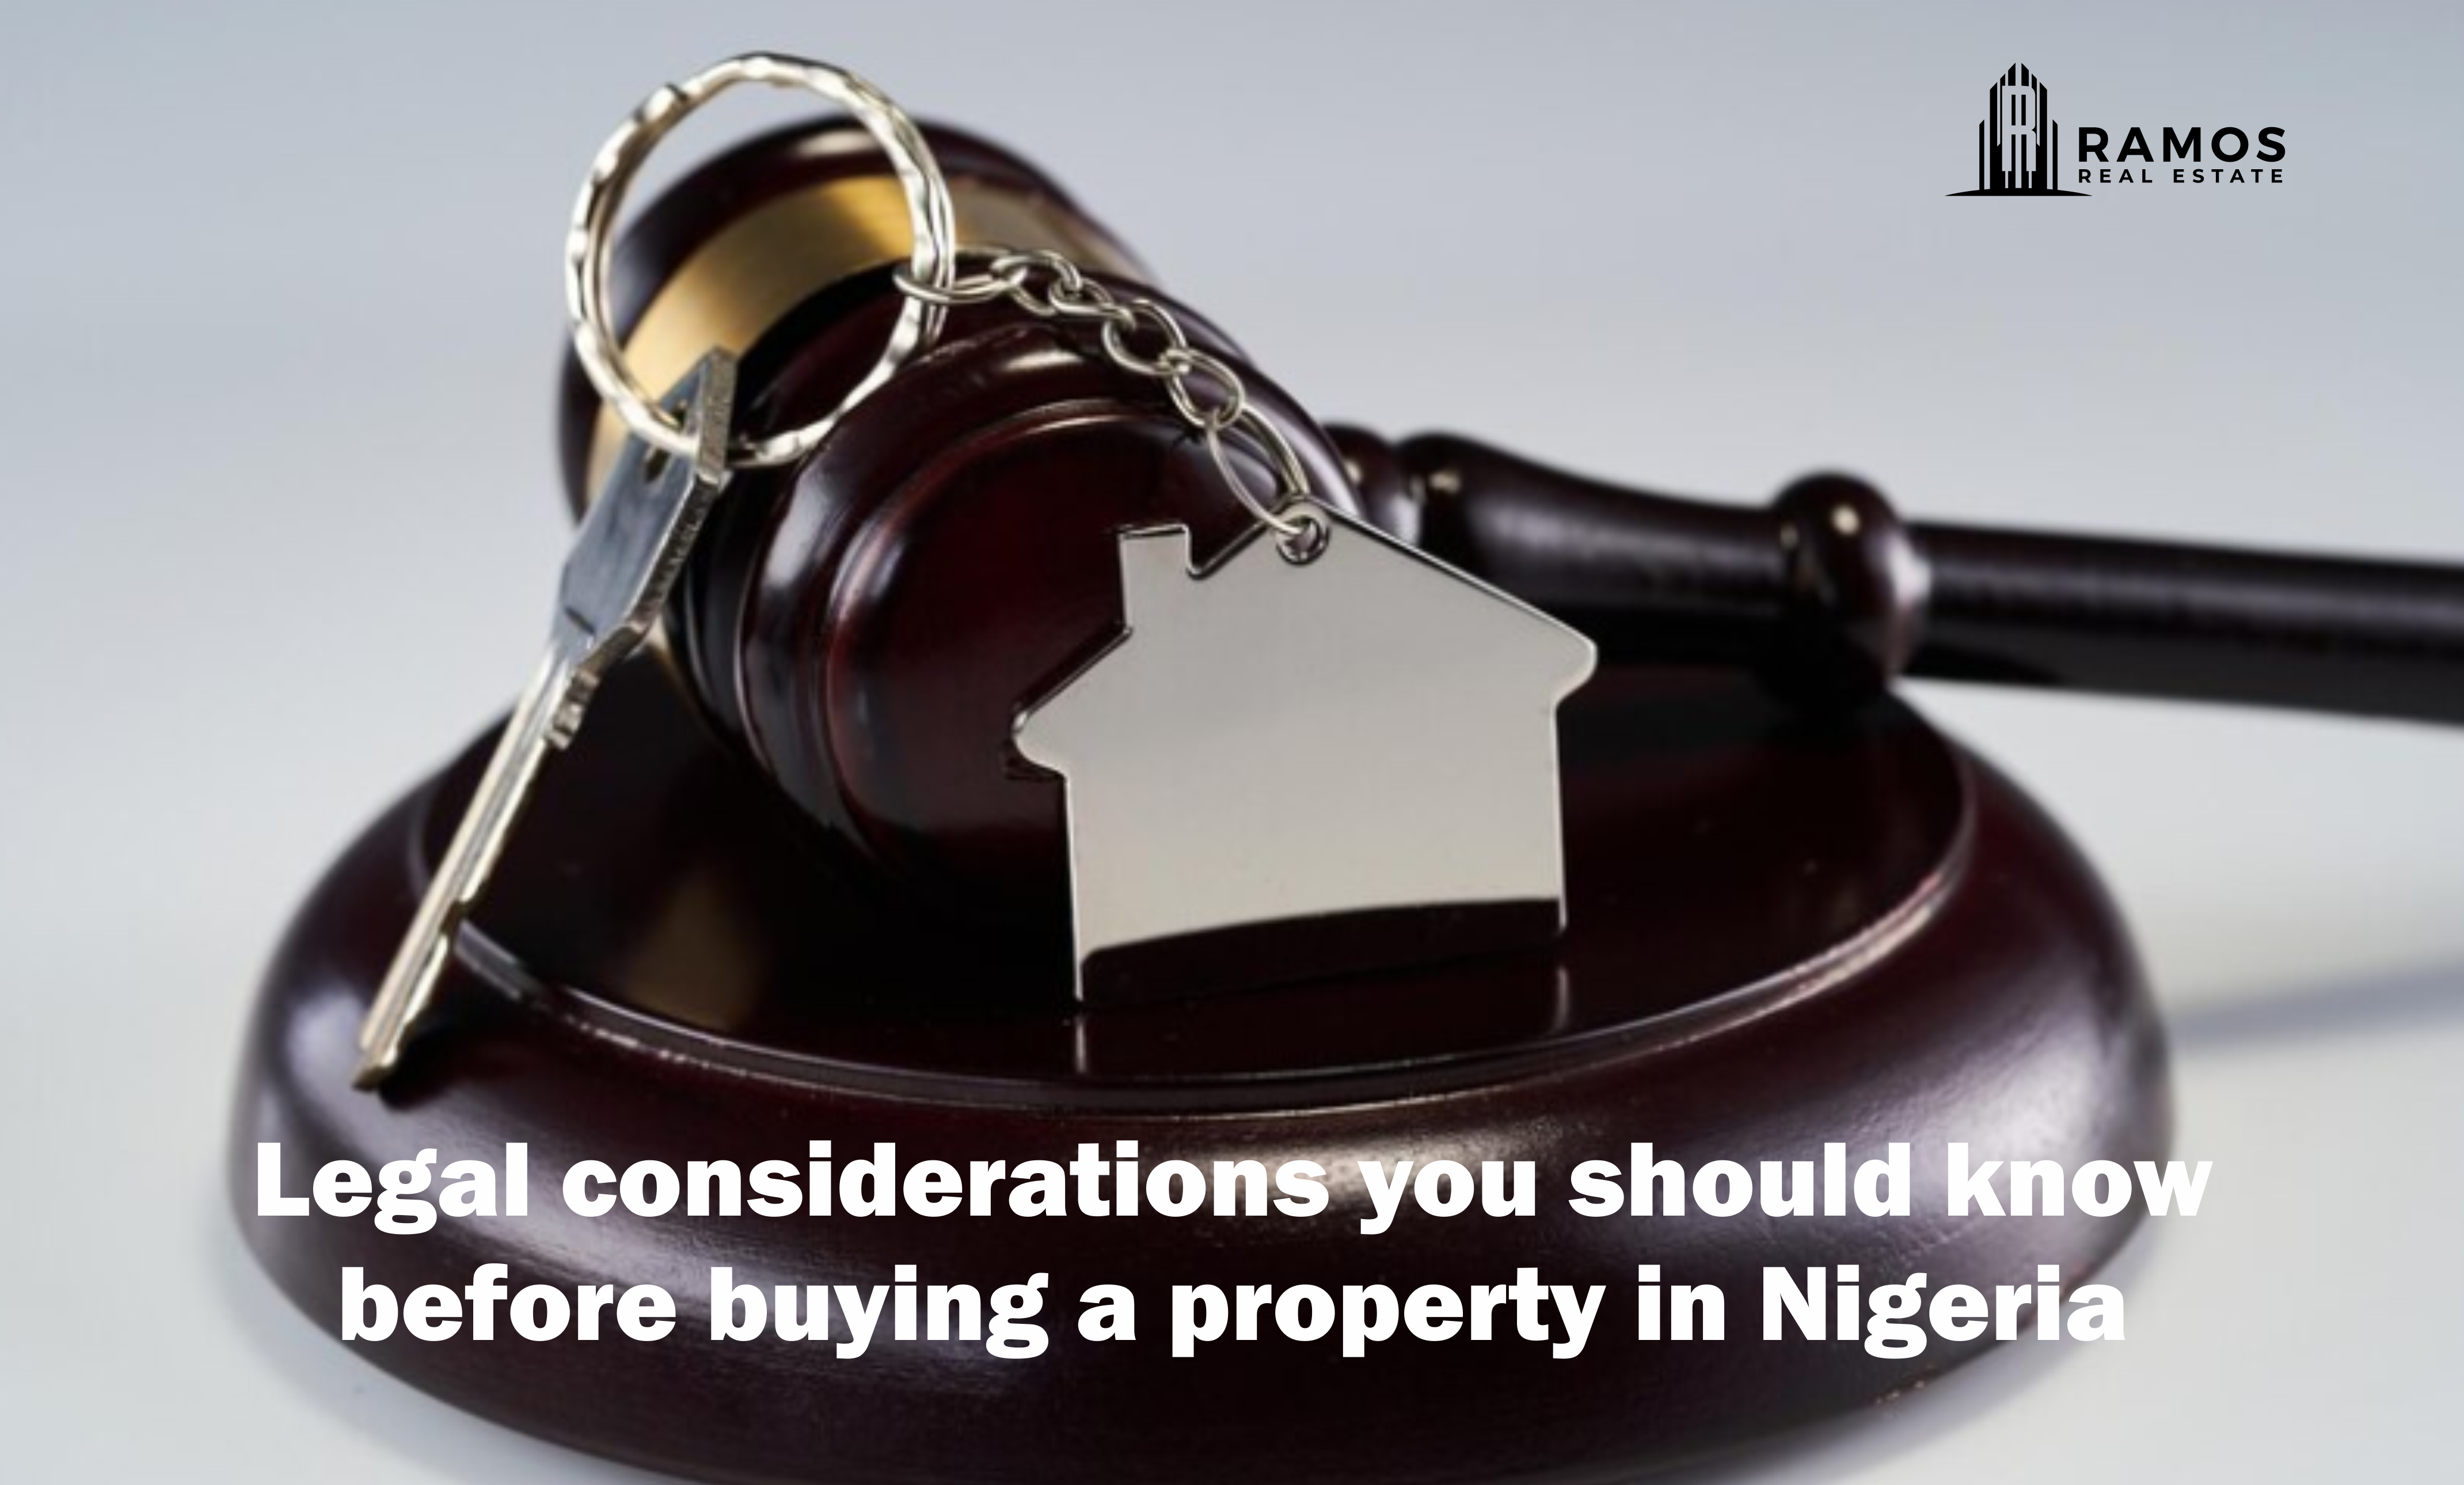 Legal considerations you should know before buying a property in Nigeria